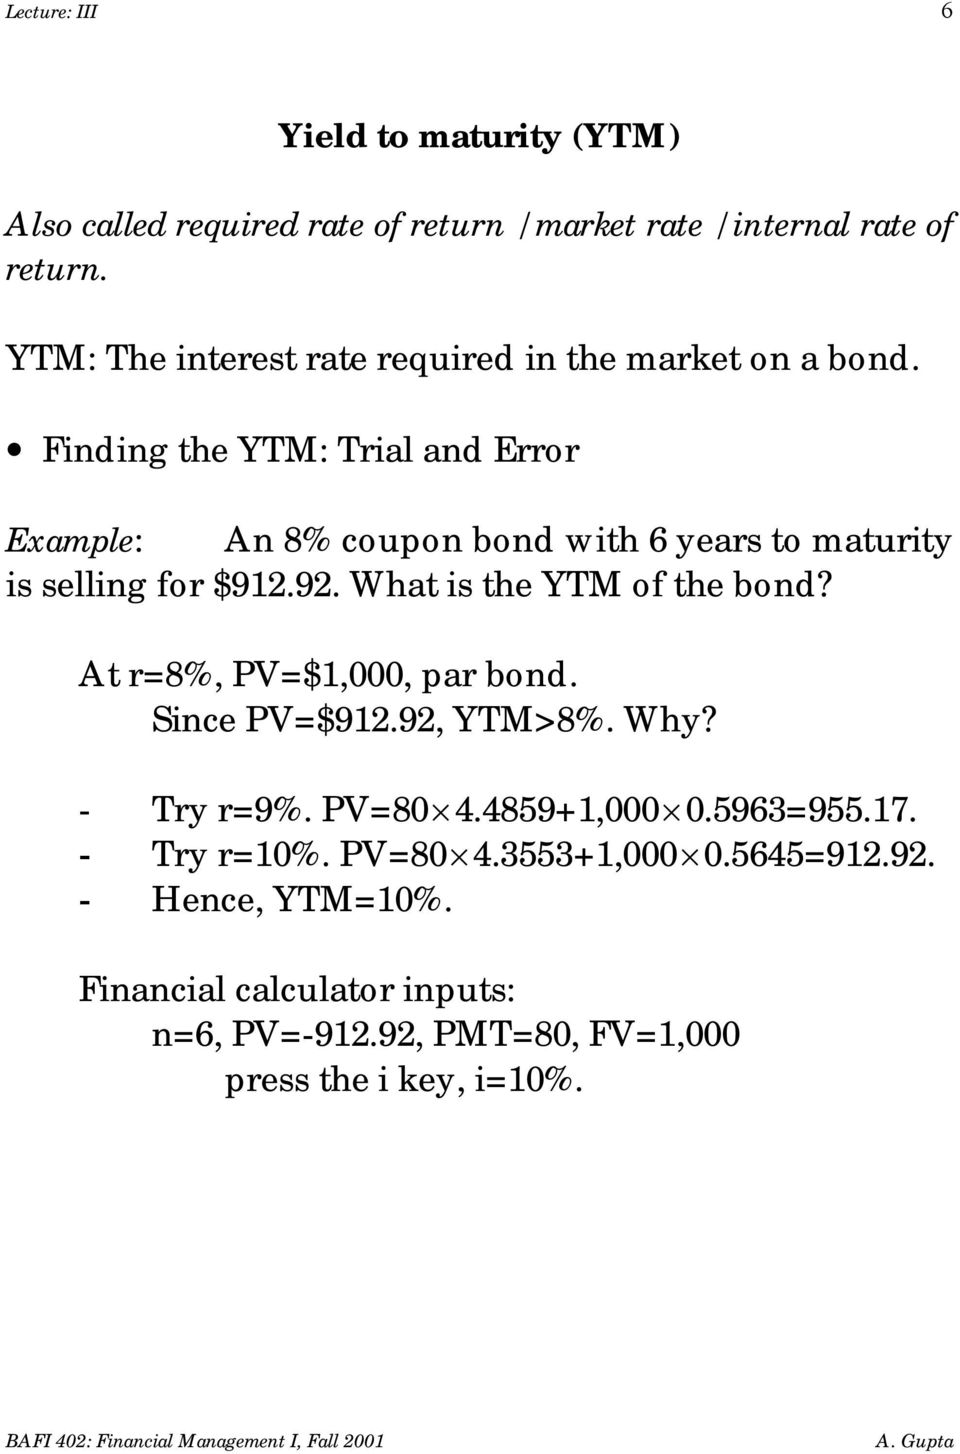 Finding the YTM: Trial and Error Example: An 8% coupon bond with 6 years to maturity is selling for $912.92. What is the YTM of the bond?